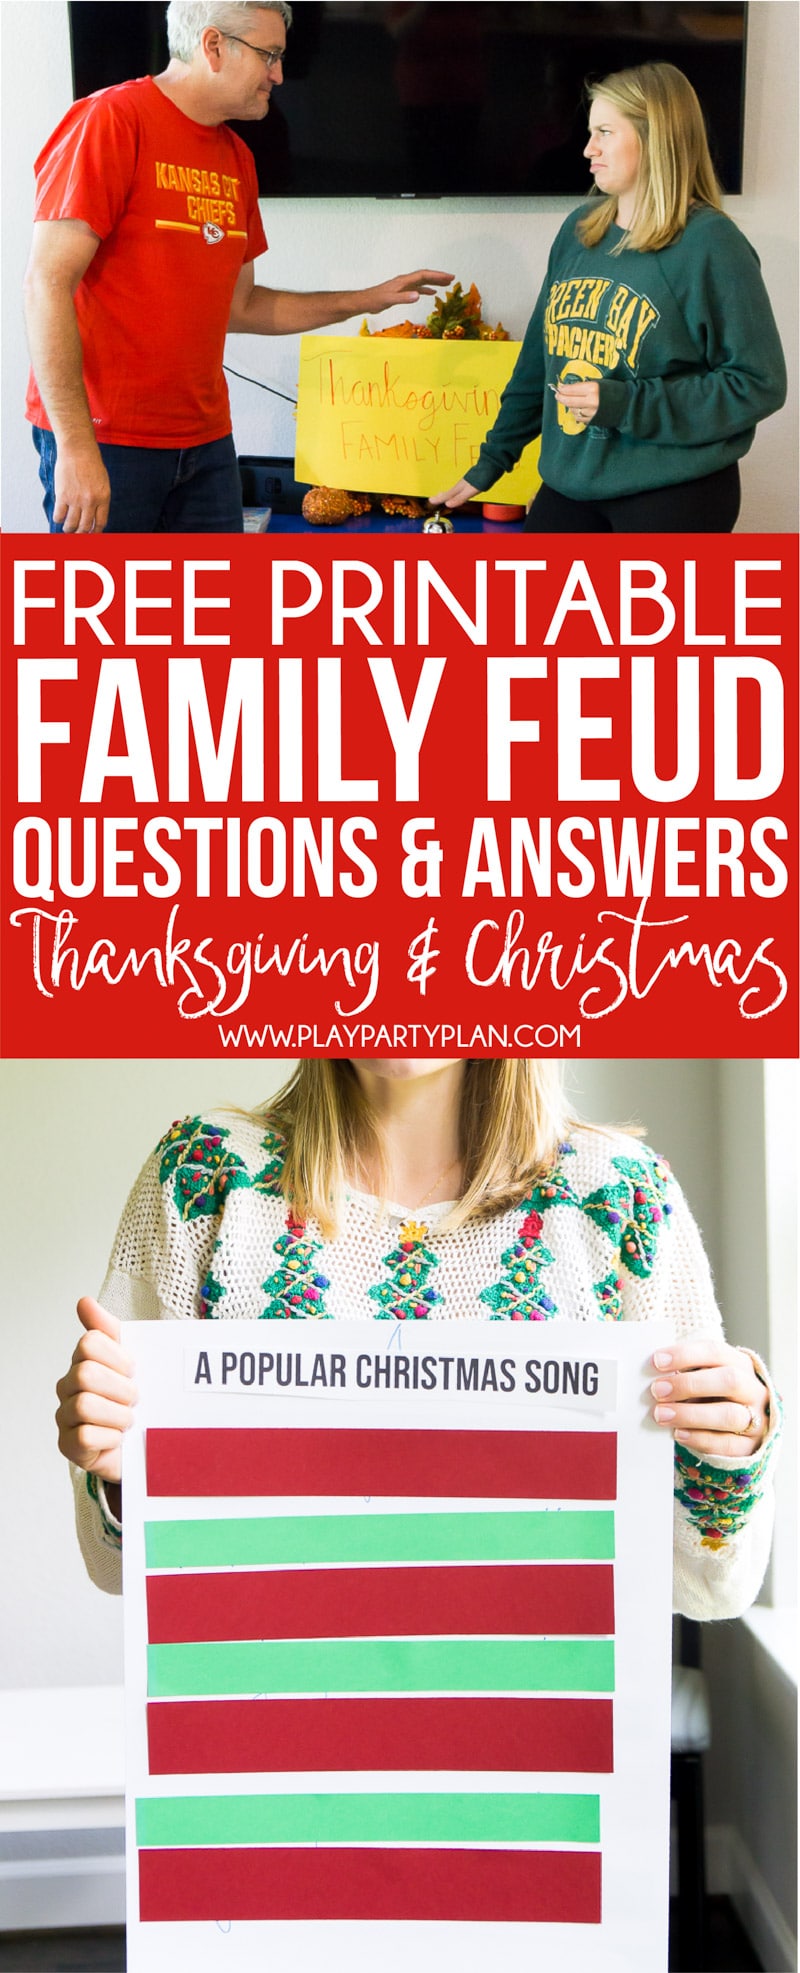 FREE Christmas Family Feud Questions and Answers - 85